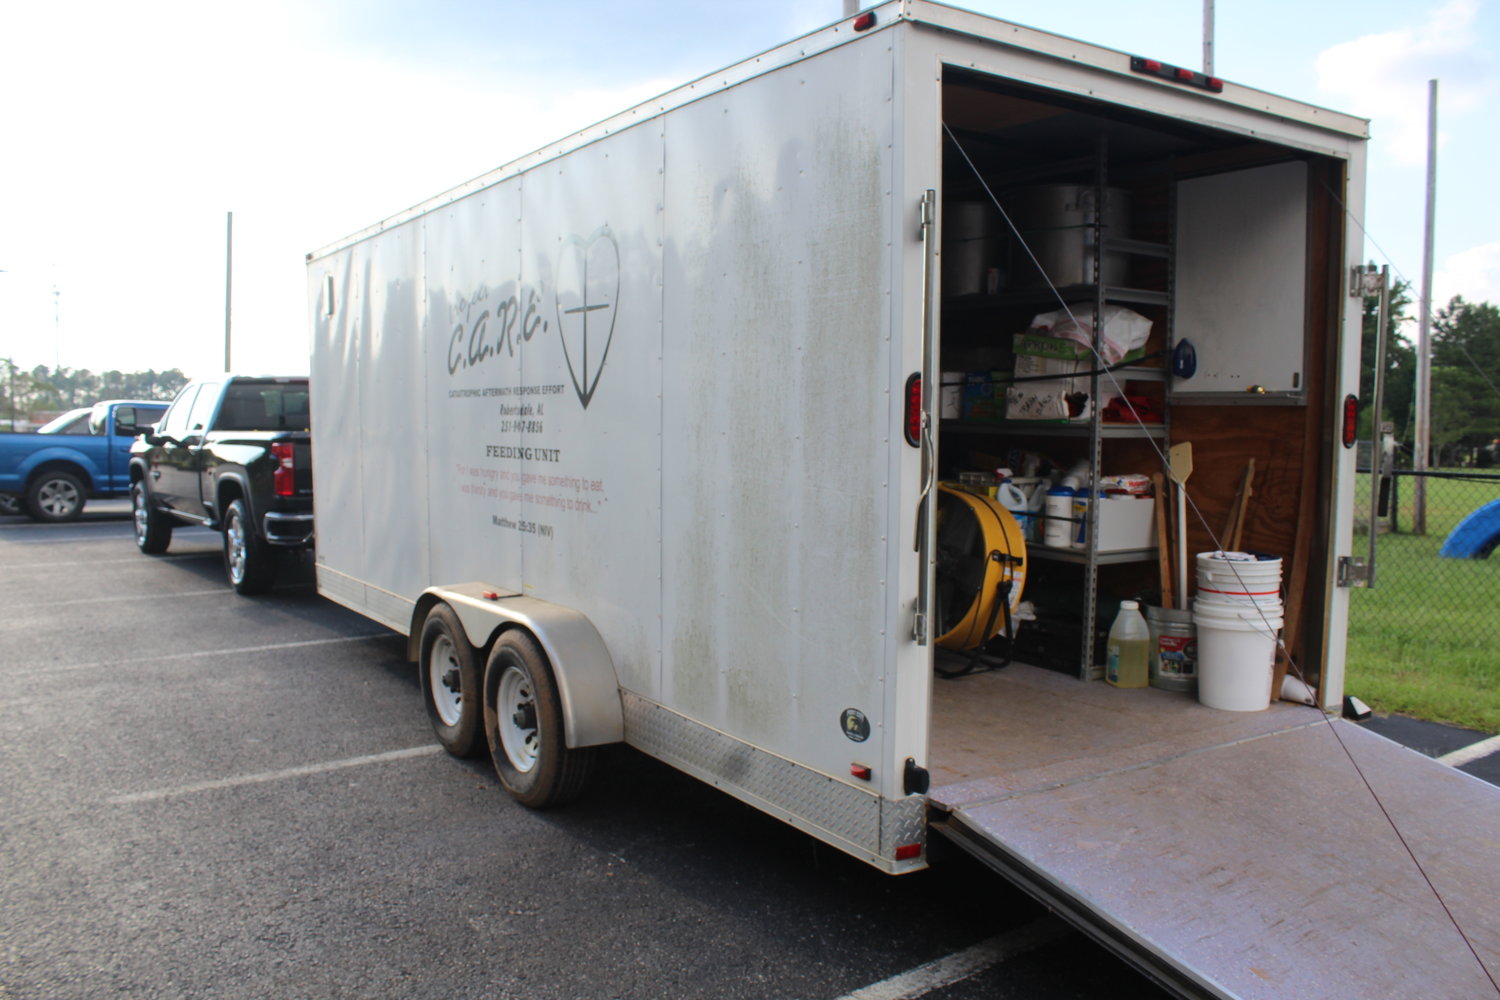 Trailers were packed with food items, prepared meals, ice, paper products and other necessary items.